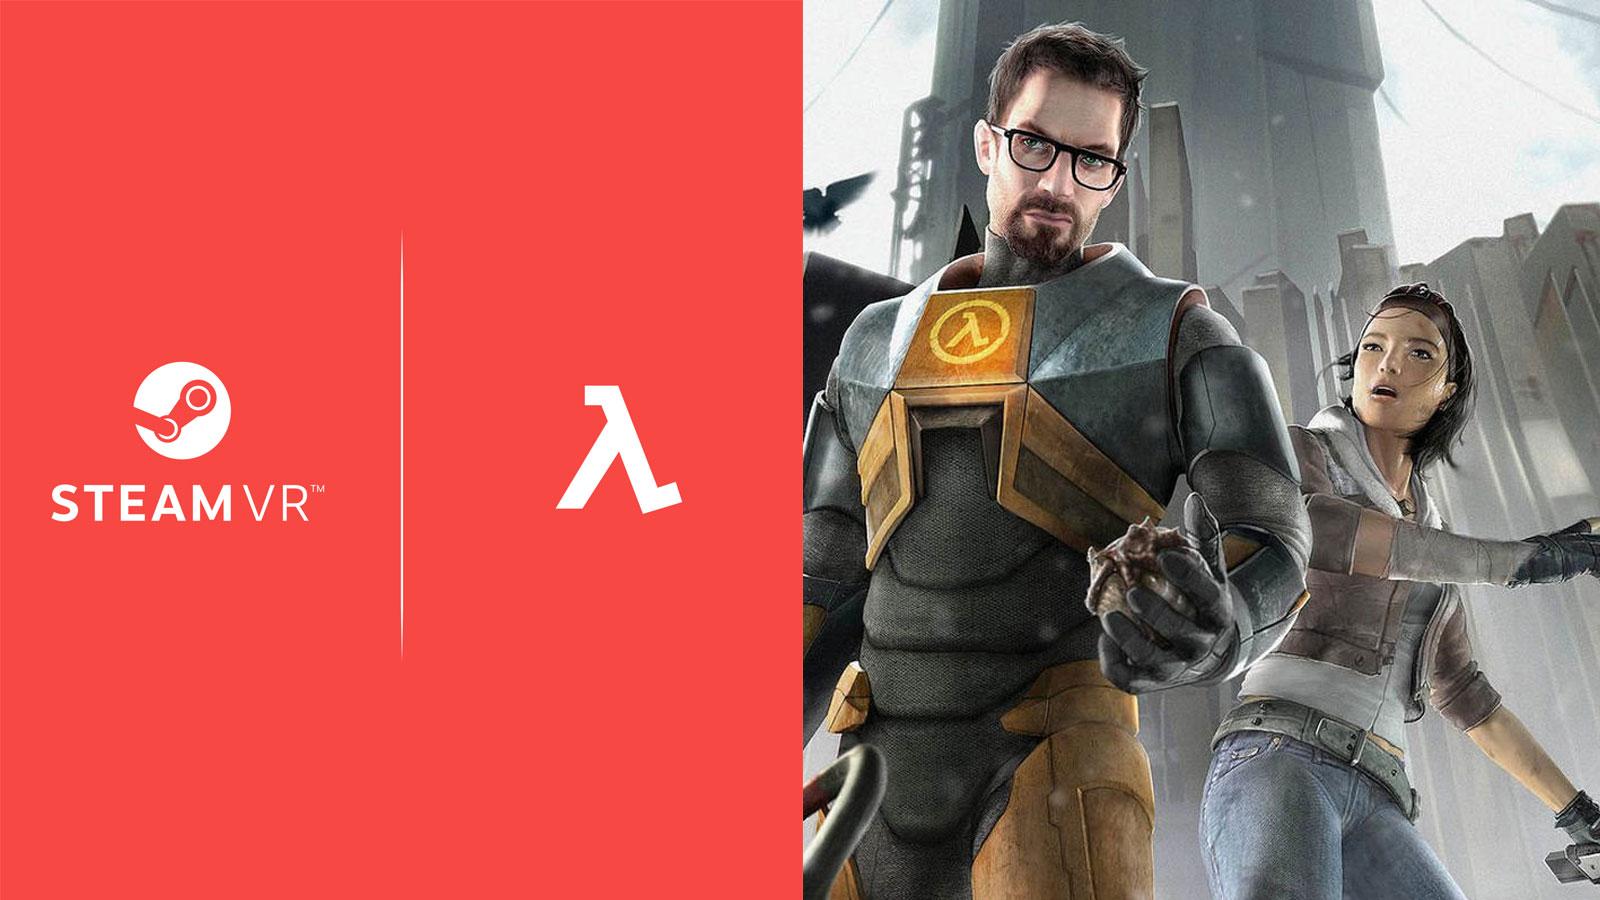 Half-Life: Alyx: What we know about Valve's upcoming full-length